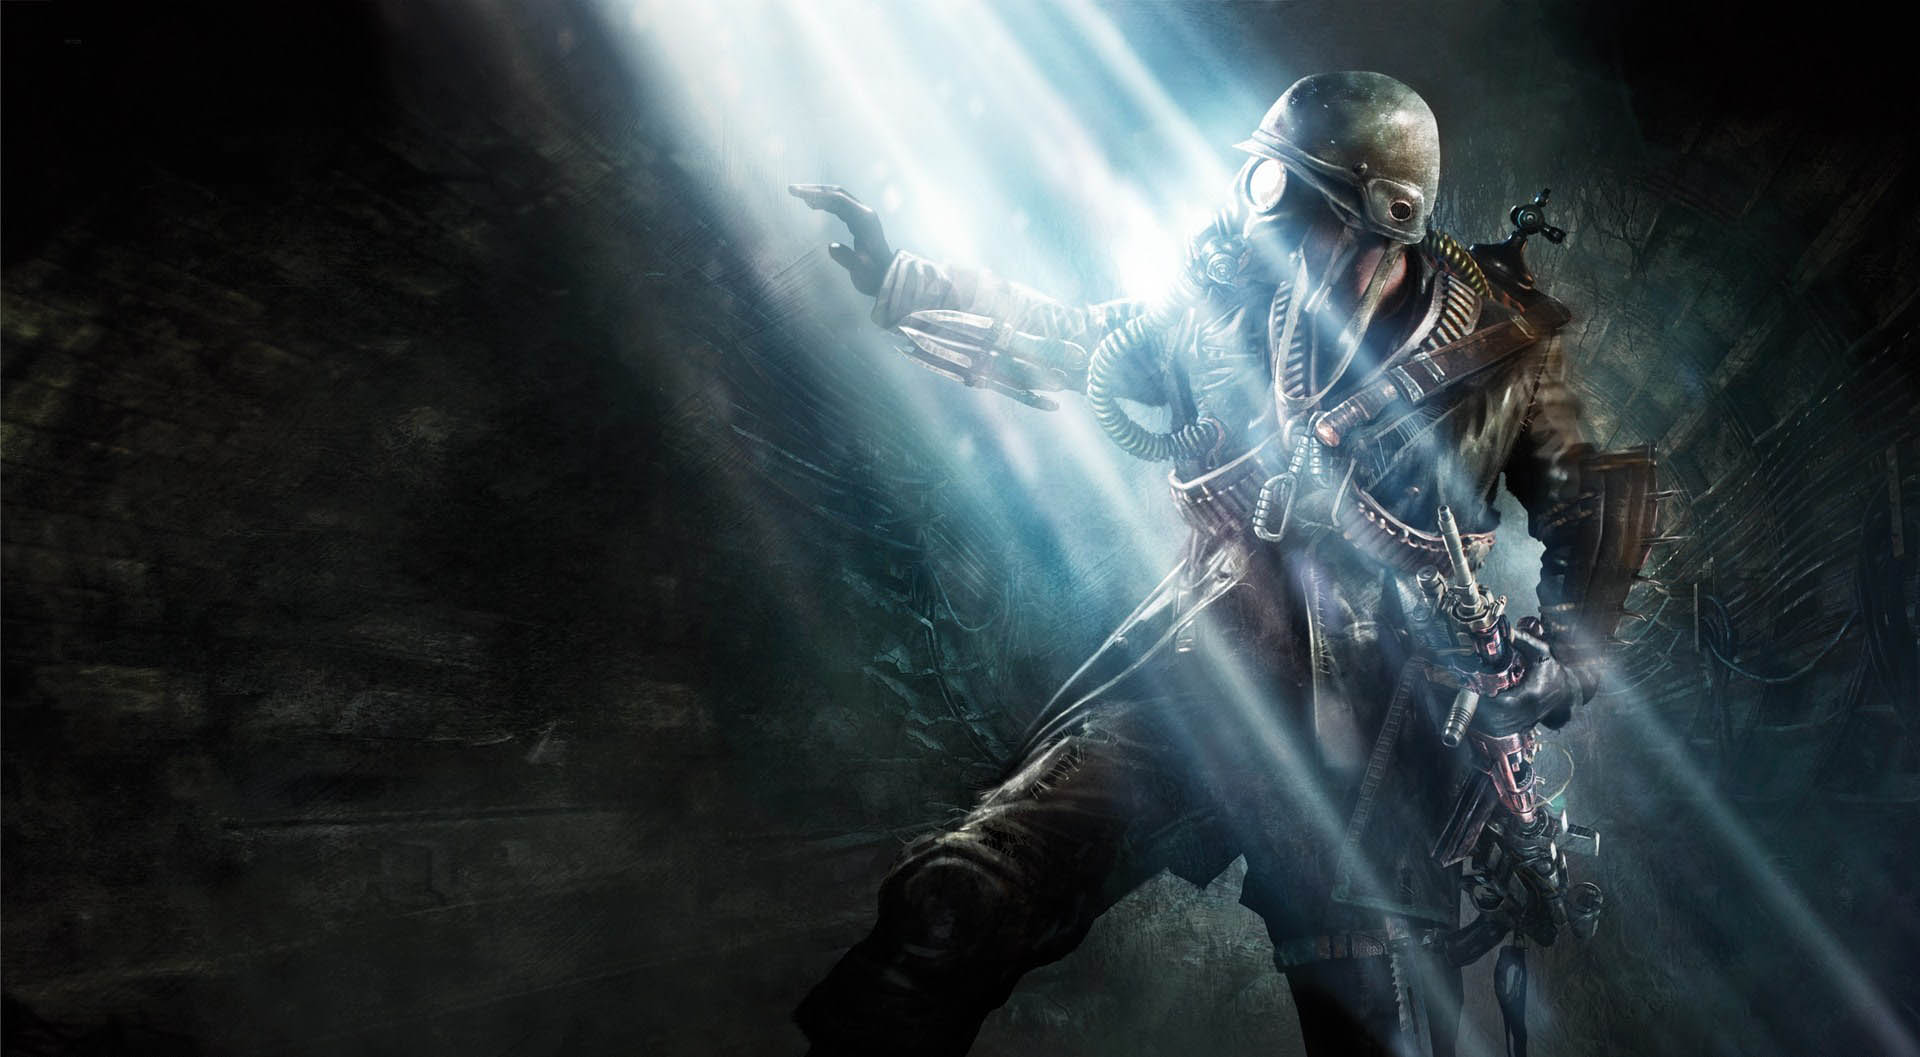 Tag Metro Last Light HD Wallpapers exquisite Latest Updates